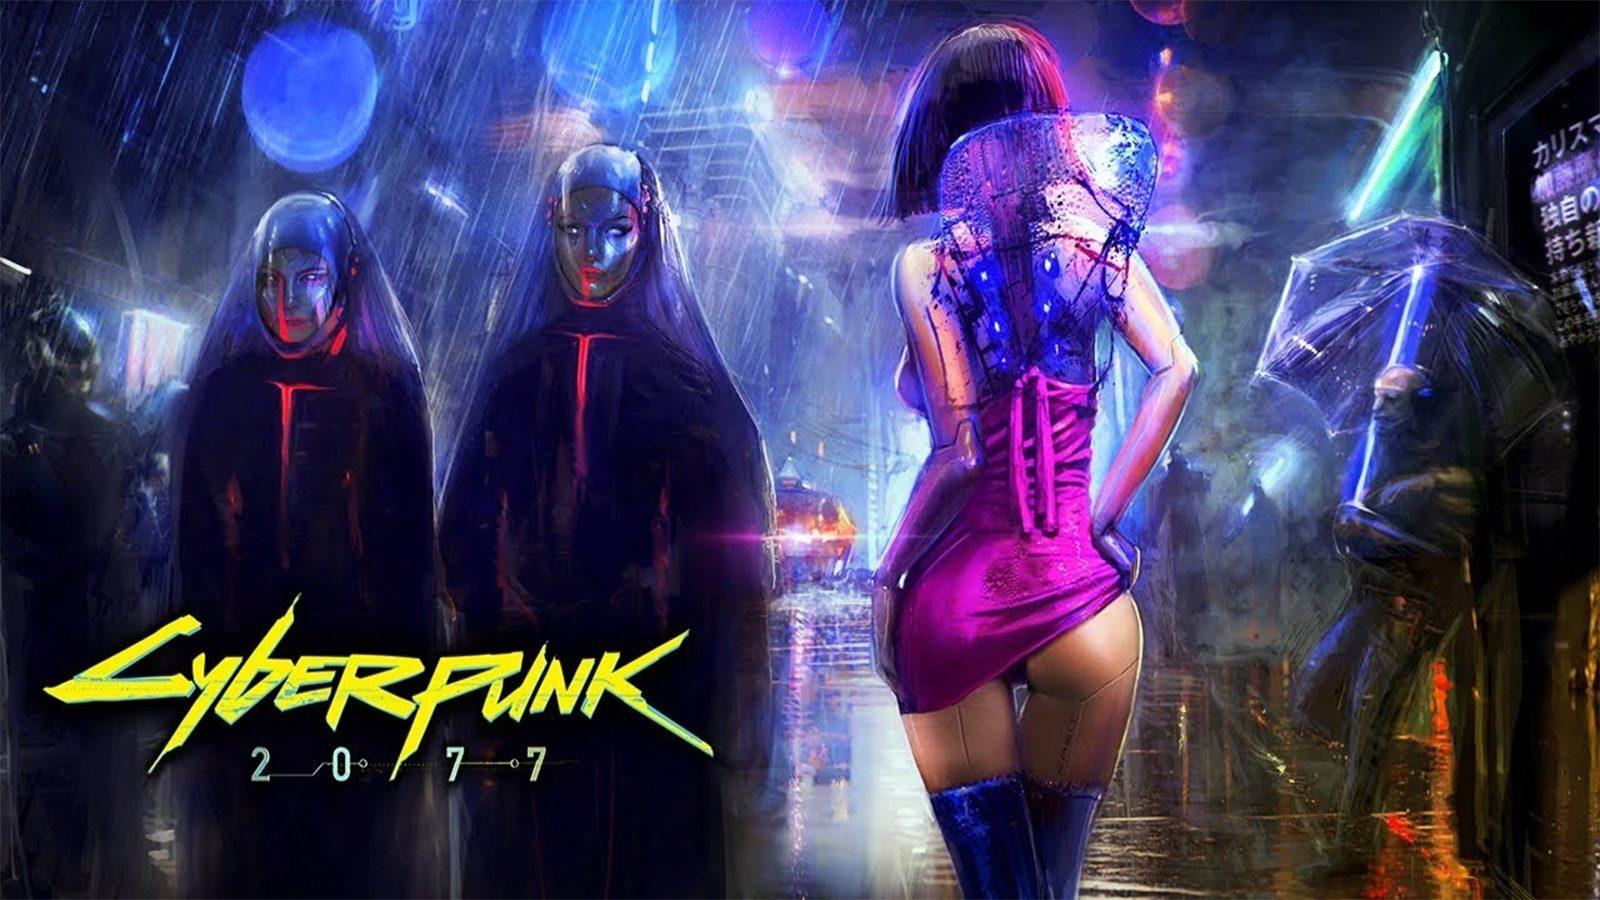 CD Projekt Red Highlights How To Mod Animations In Cyberpunk 2077 - Gameranx